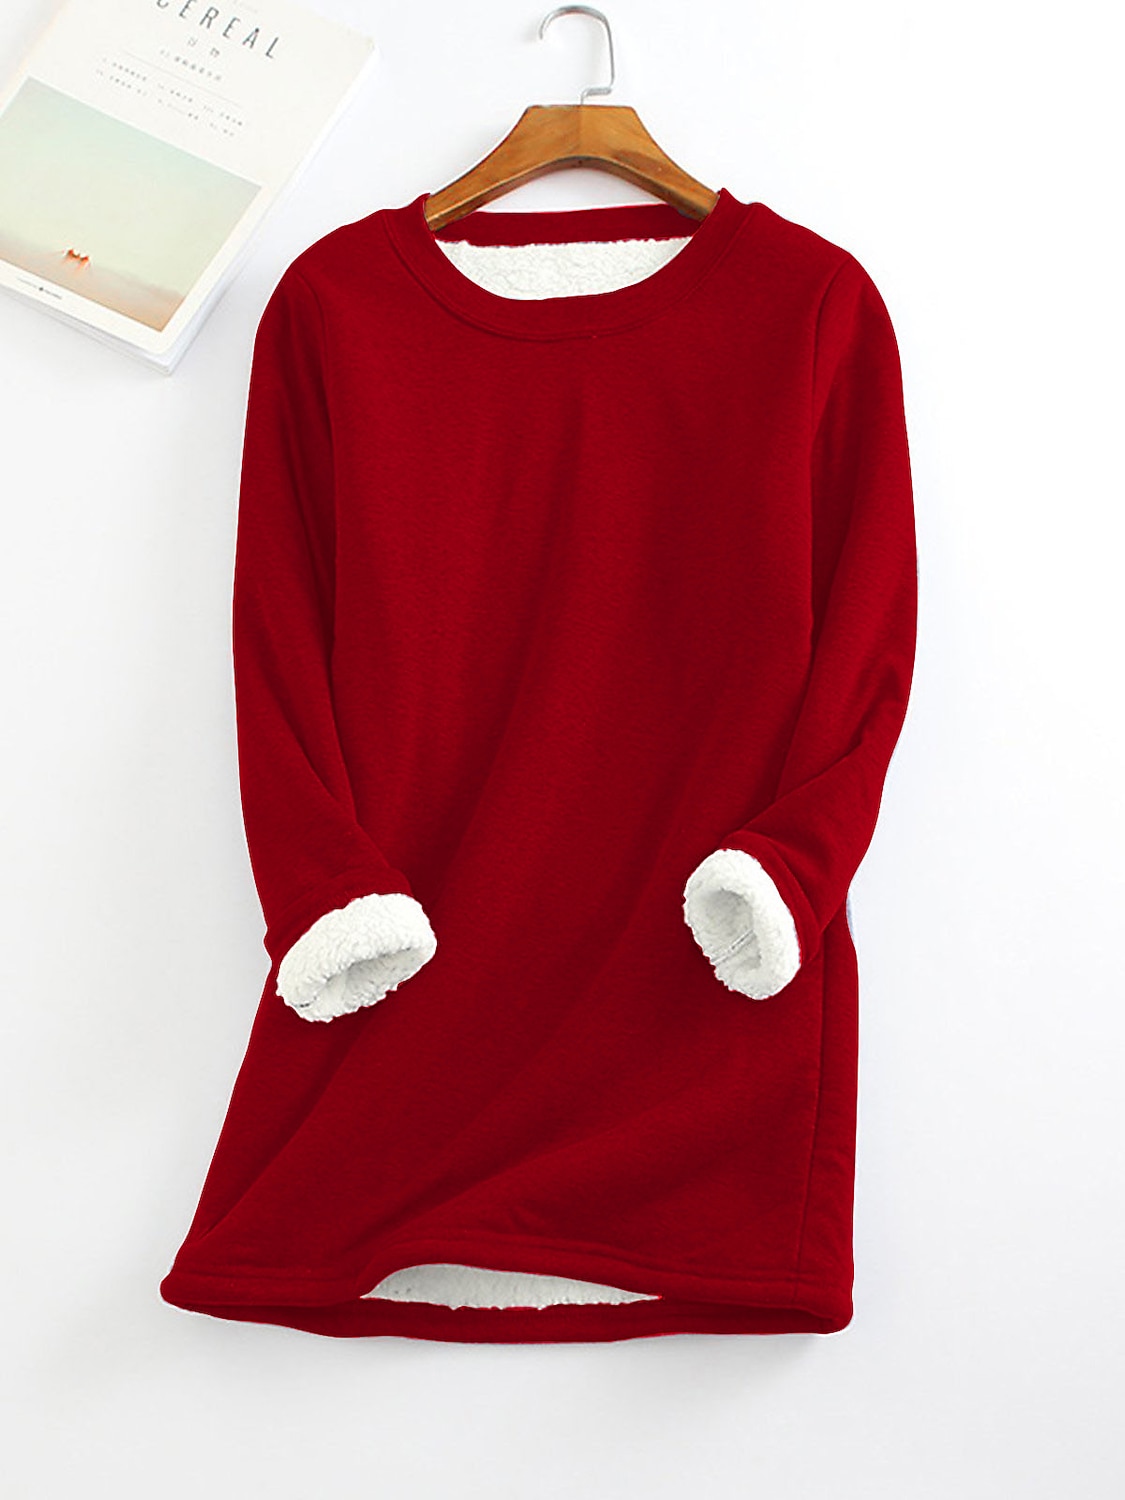 Women's Casual Dress Sweatshirt Dress Winter Dress Mini Dress Teddy Fleece Home Daily Going out Basic Casual Crew Neck Long Sleeve Regular Fit Wine Red Big red Black Color S M L XL XXL Size